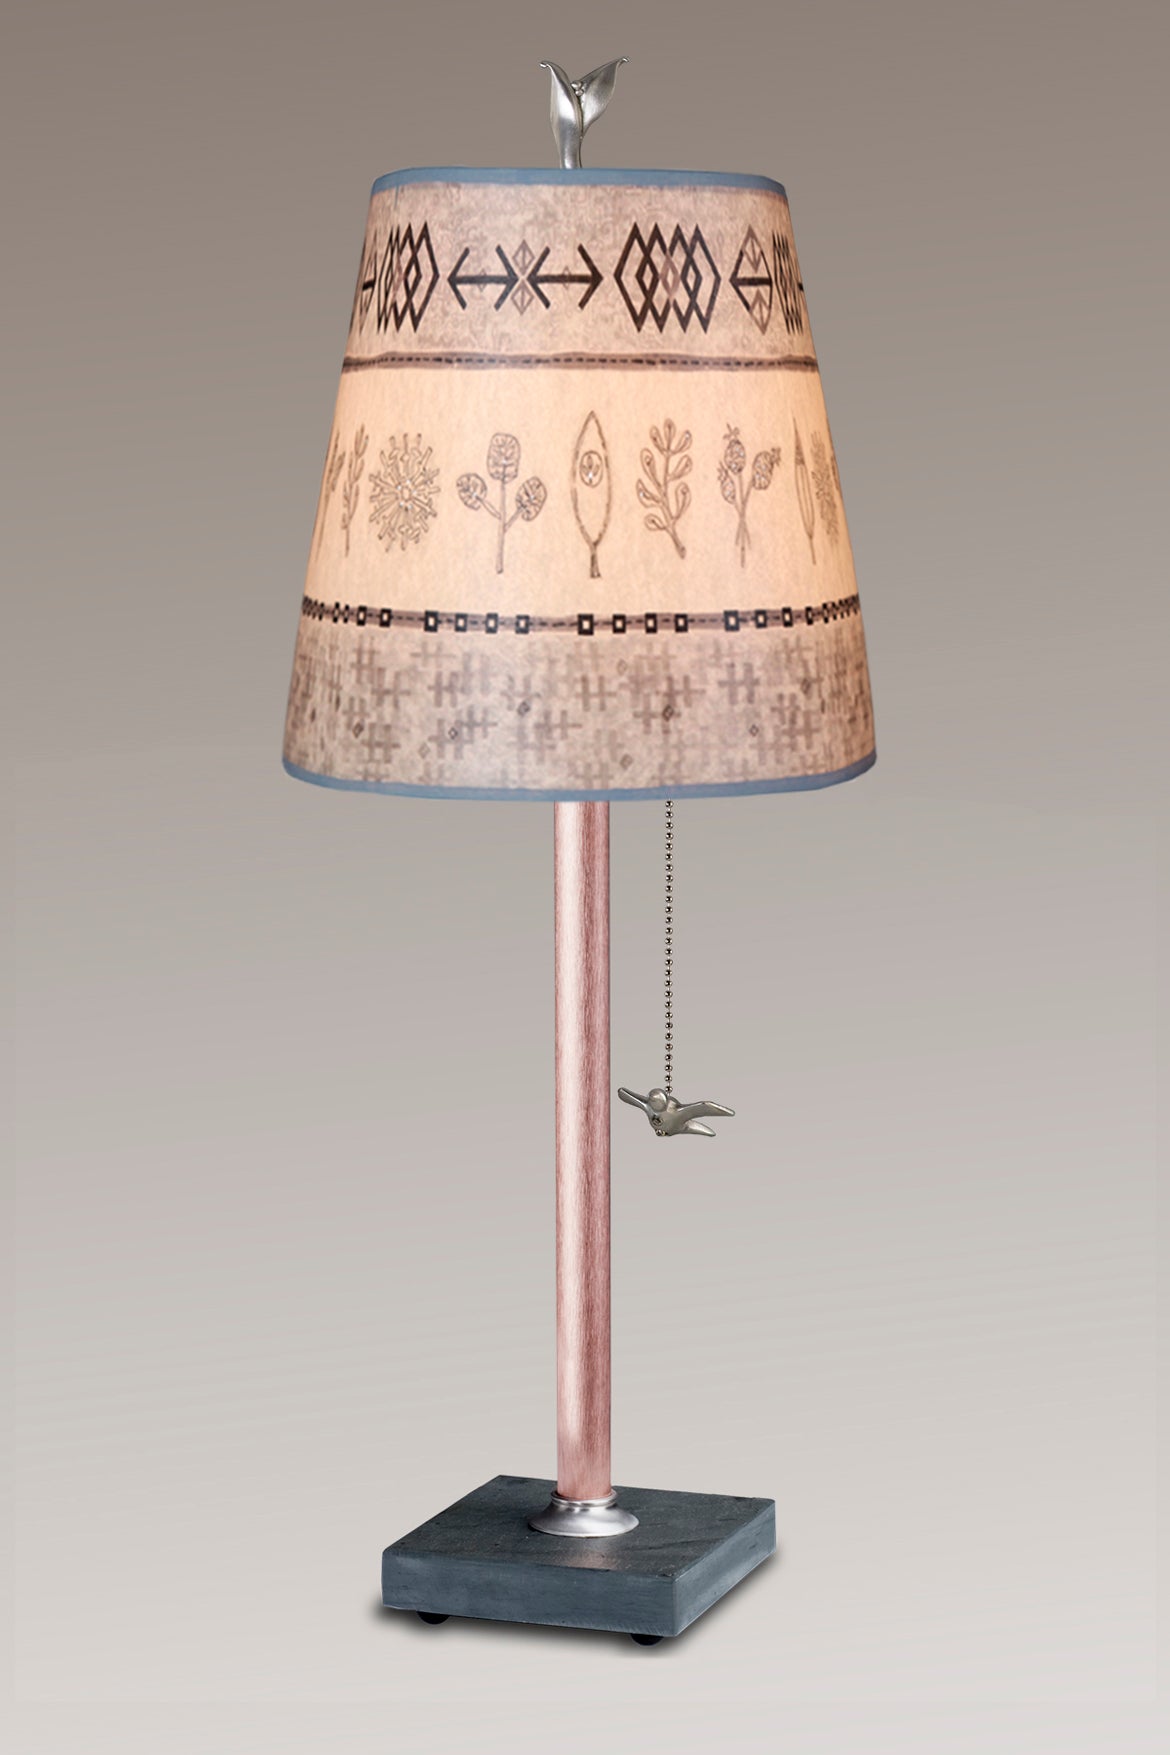 Janna Ugone &amp; Co Table Lamps Copper Table Lamp with Small Drum in Woven &amp; Sprig in Mist